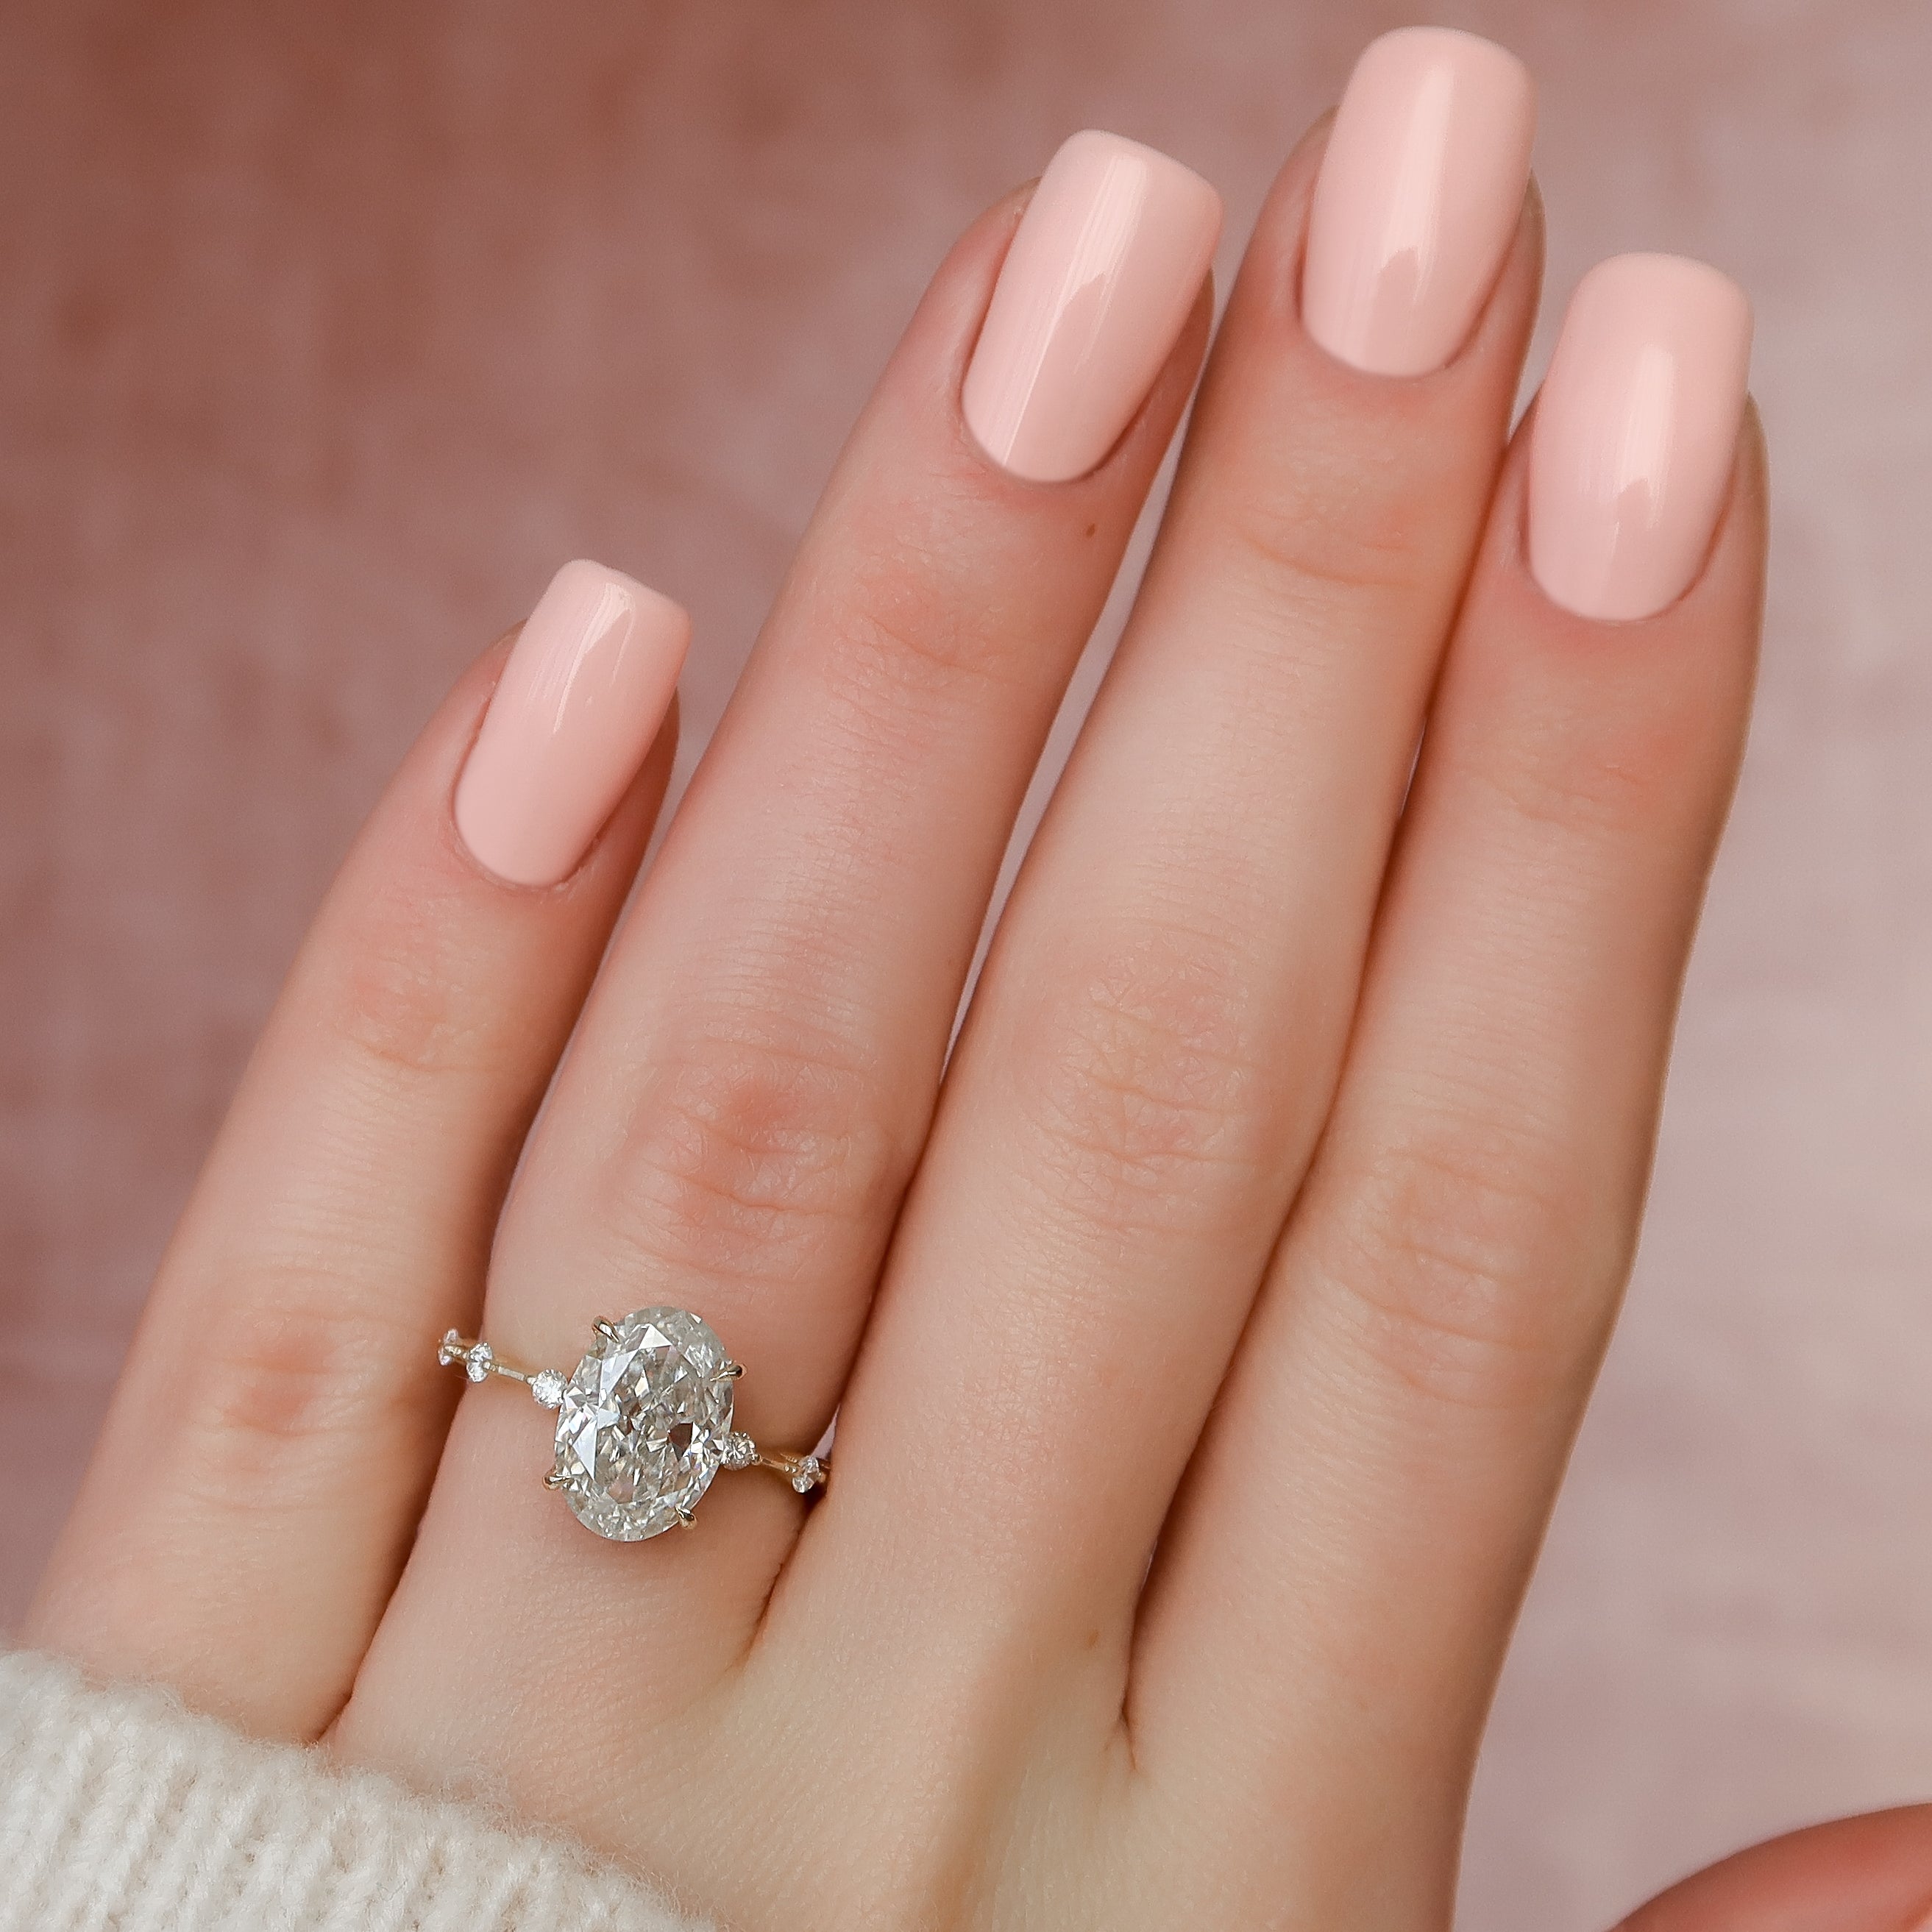 When it's Time to Resize a Ring | Schiffman's Jewelers